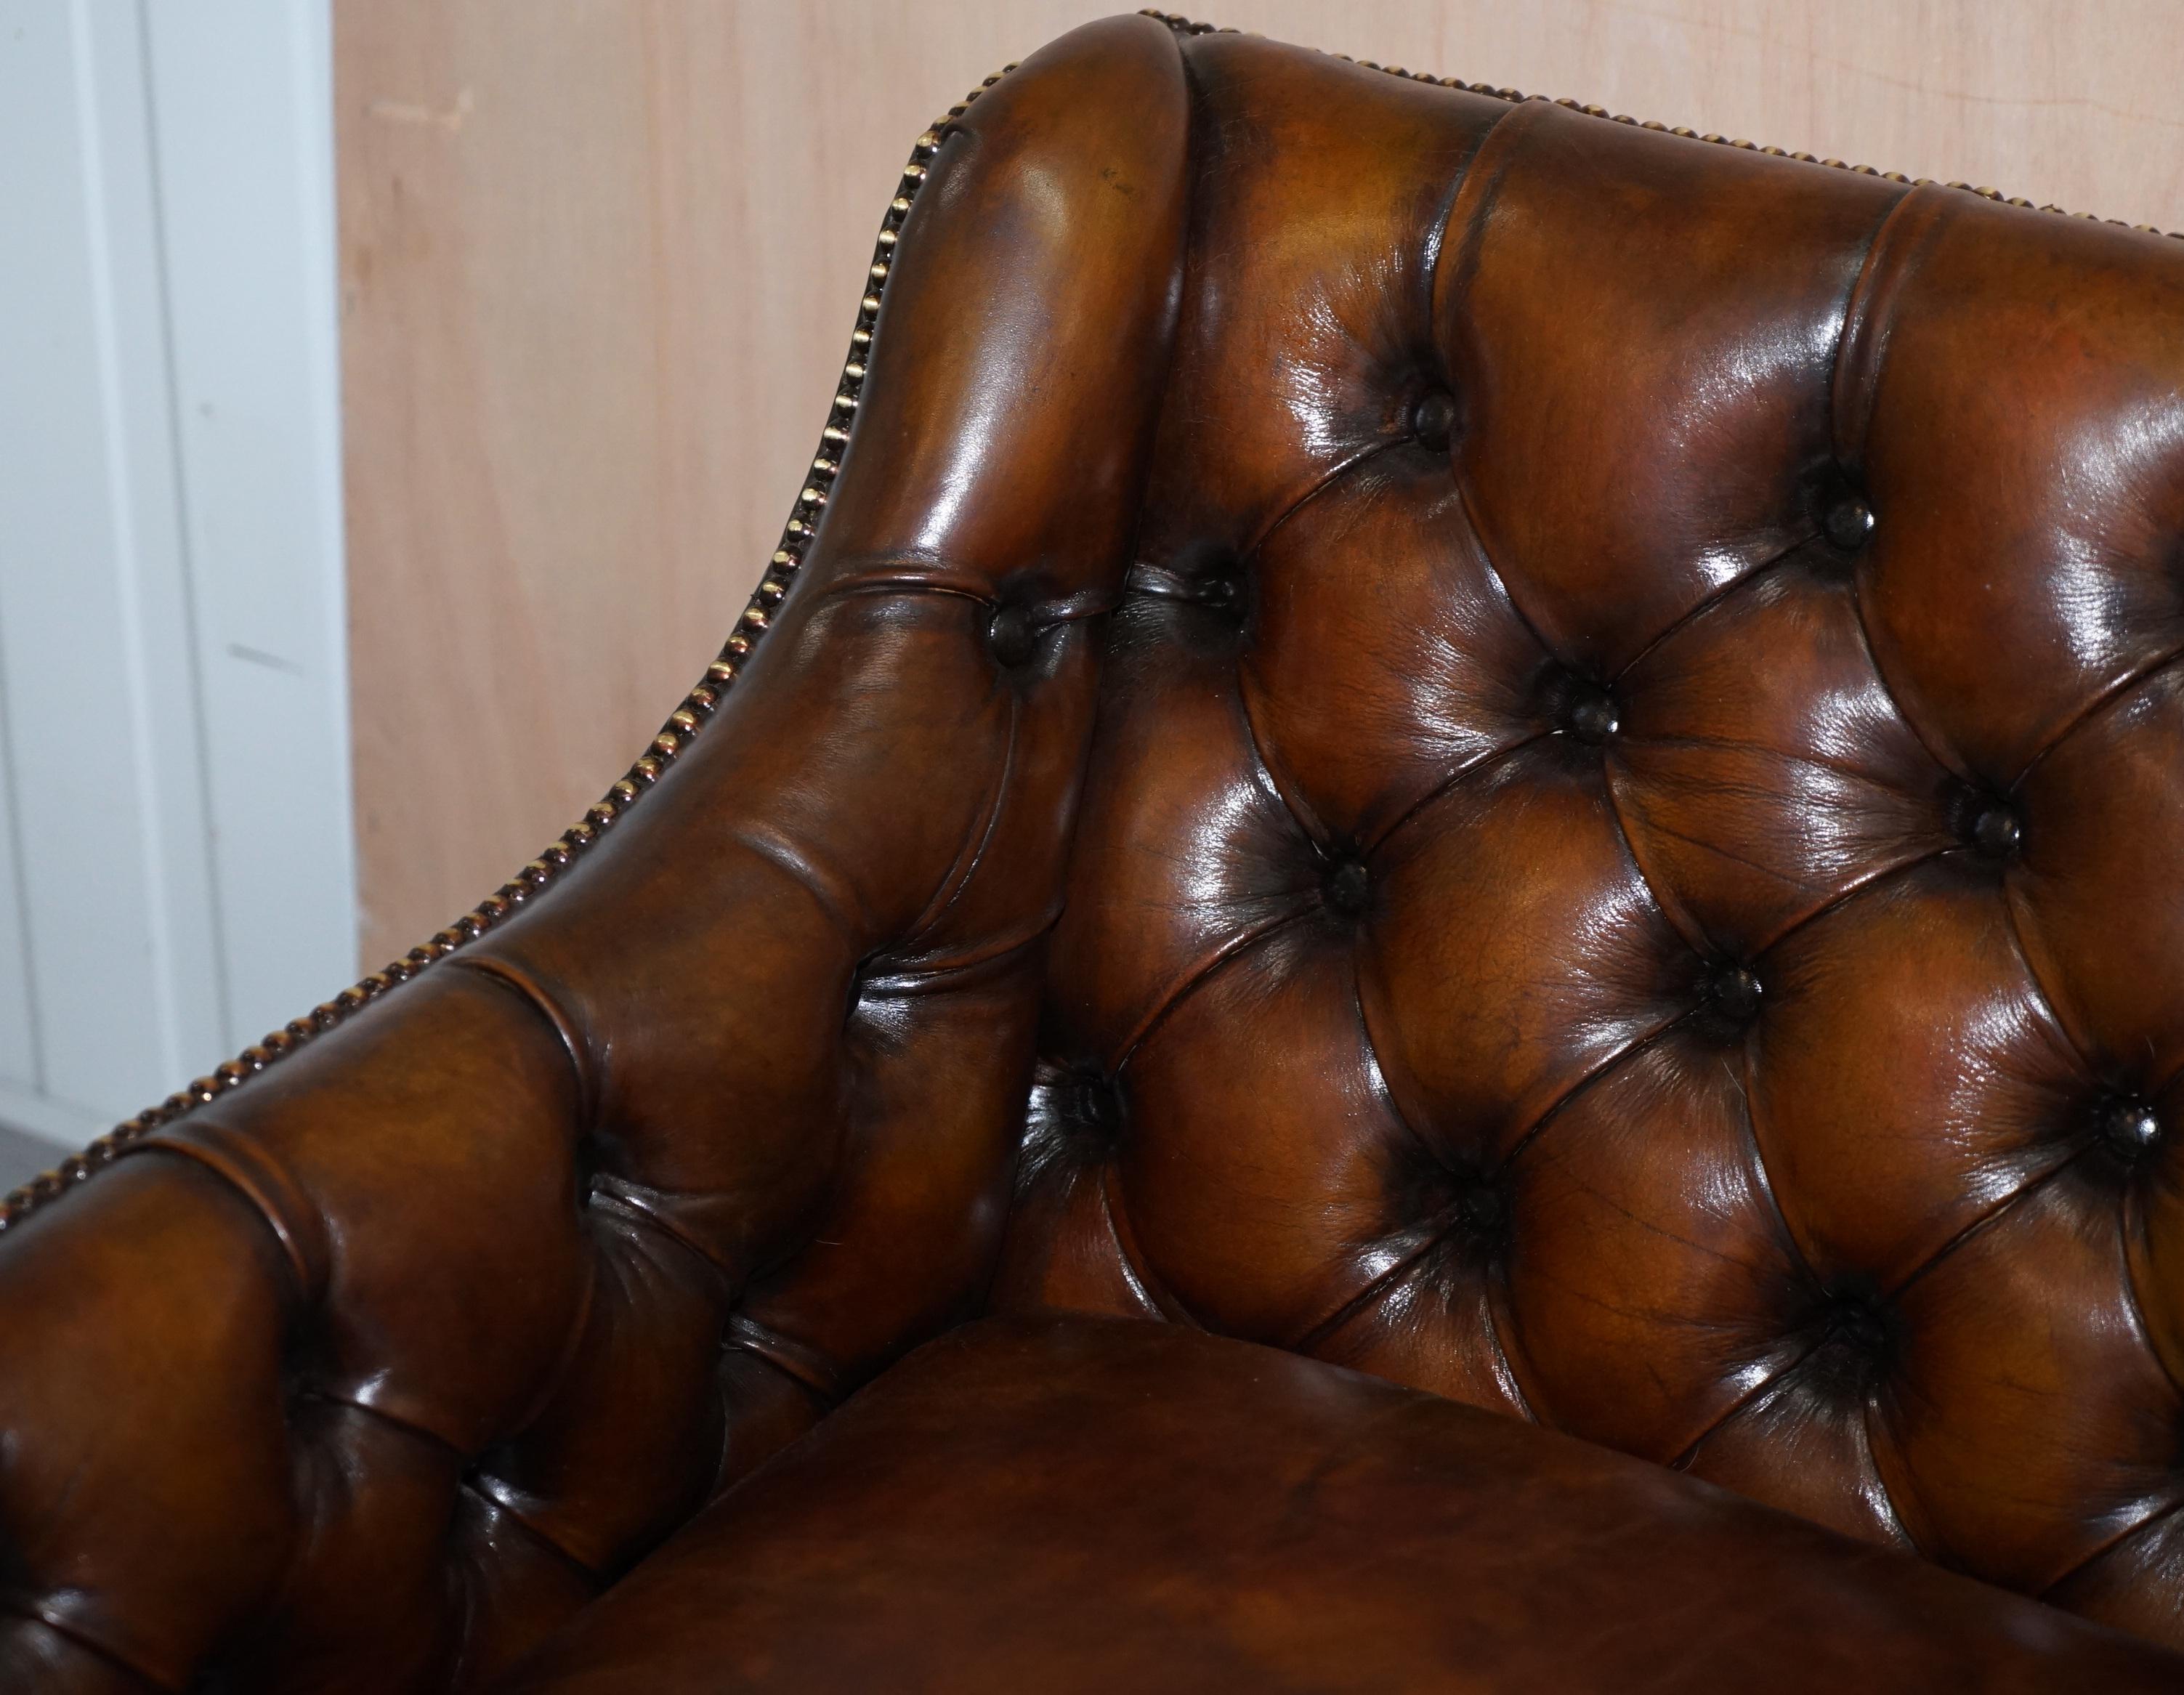 Pair of Very Rare Chesterfield Lutyen's Style Viceroy's Brown Leather Armchairs 1